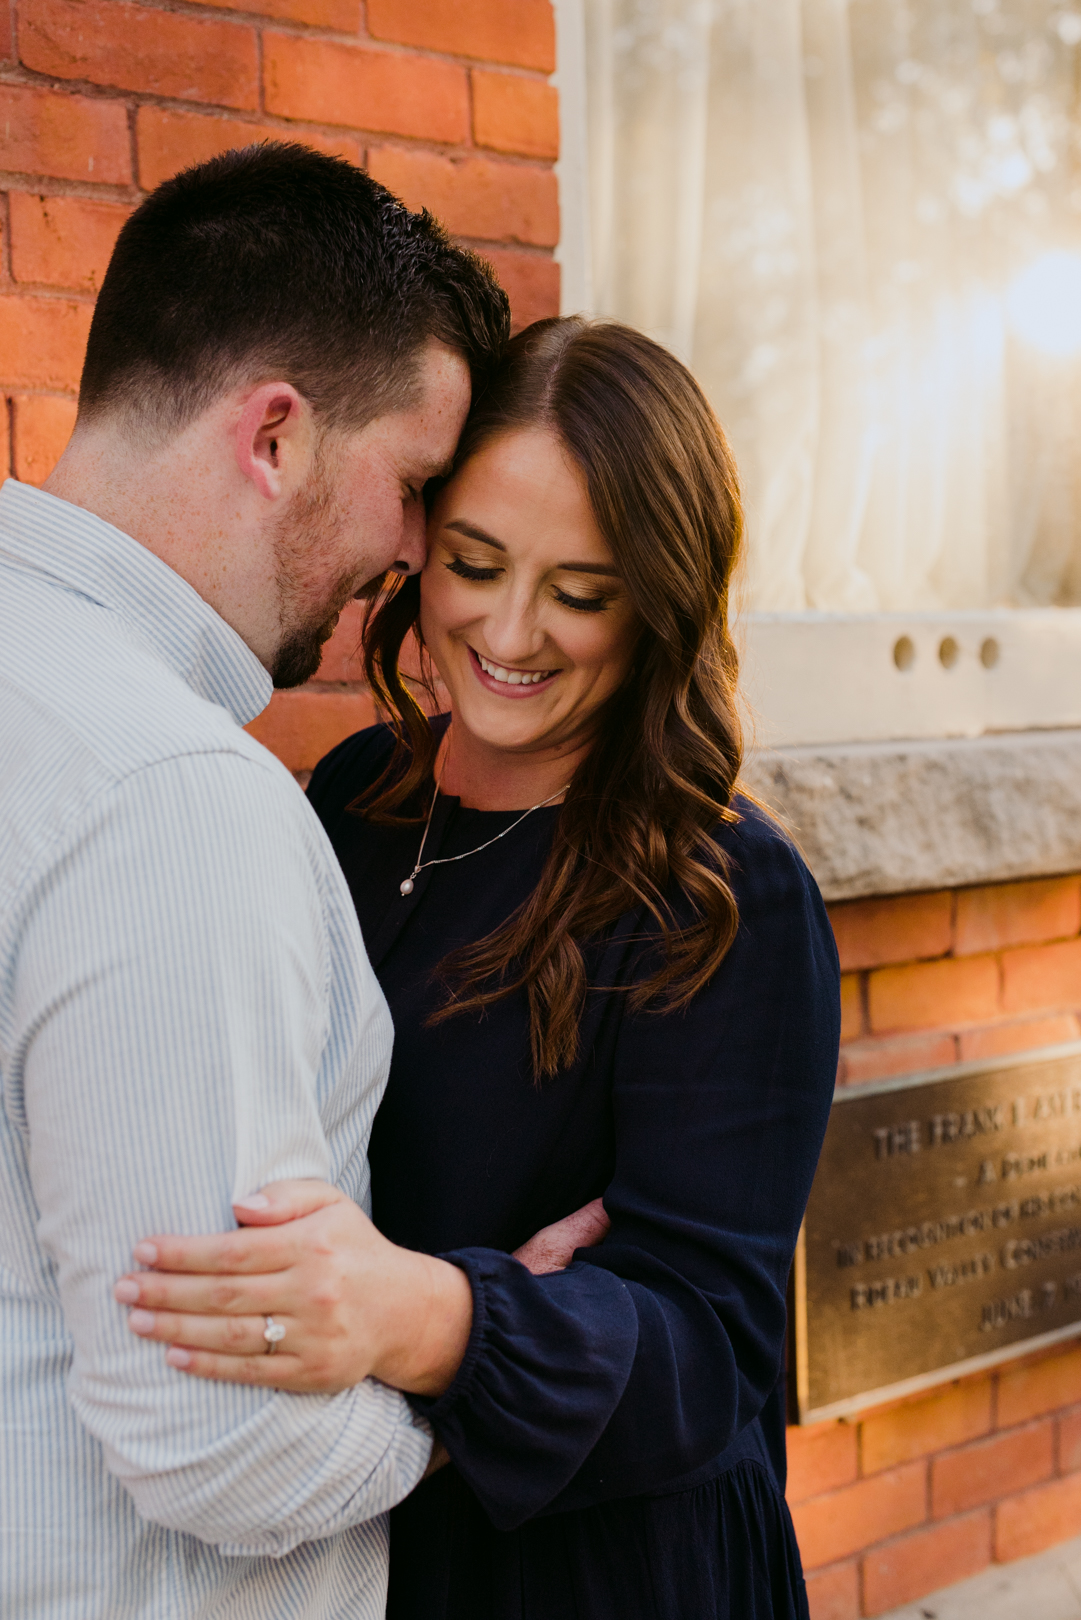 engaged couple cuddling at sunset by red brick building